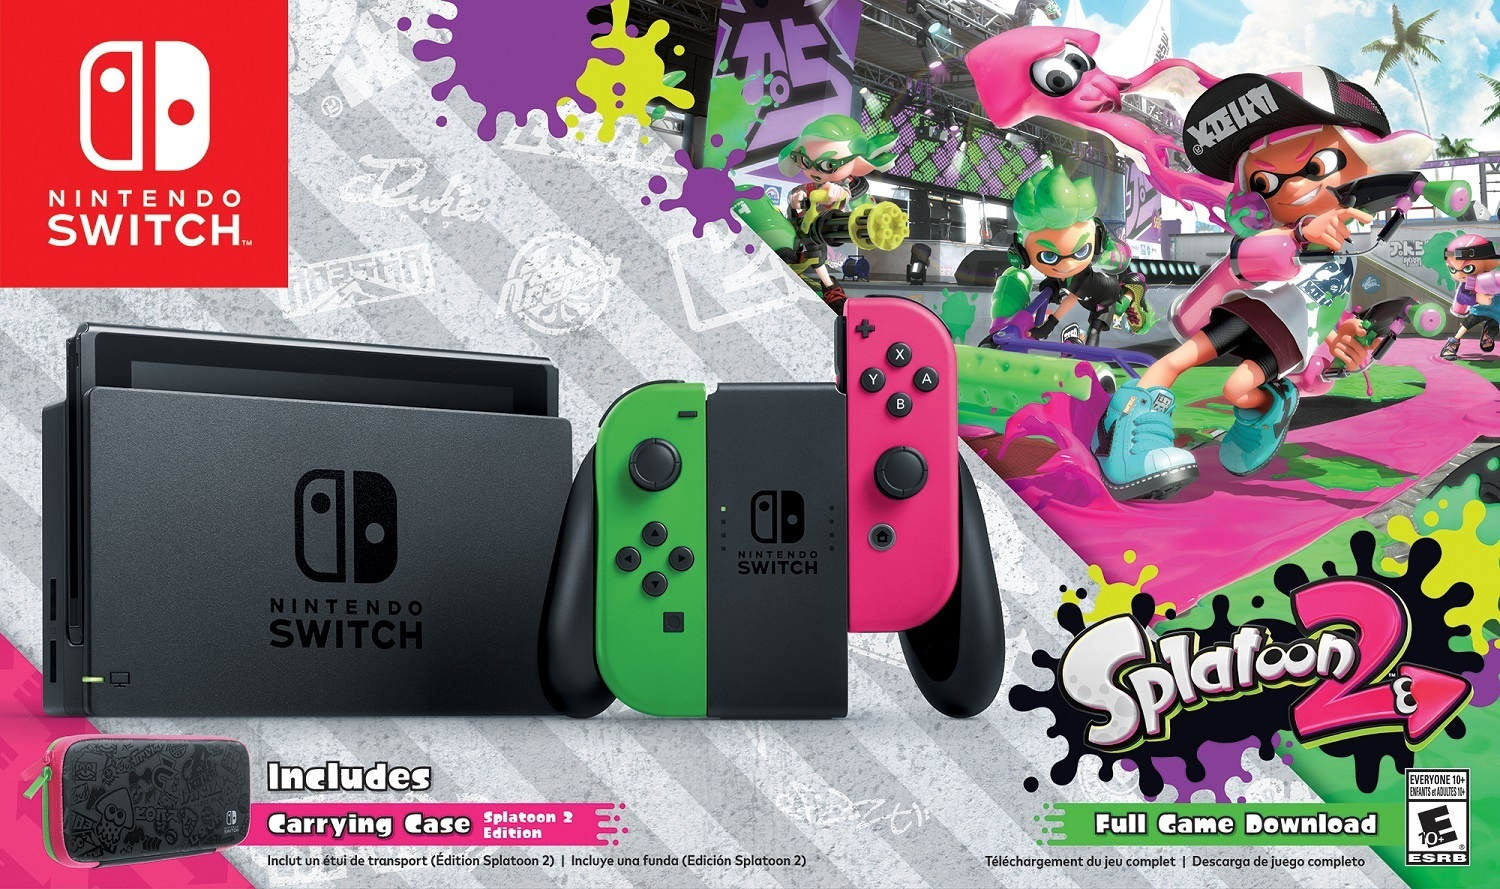 Colourful Nintendo Switch Splatoon 2 Edition Bundle is Heading to North